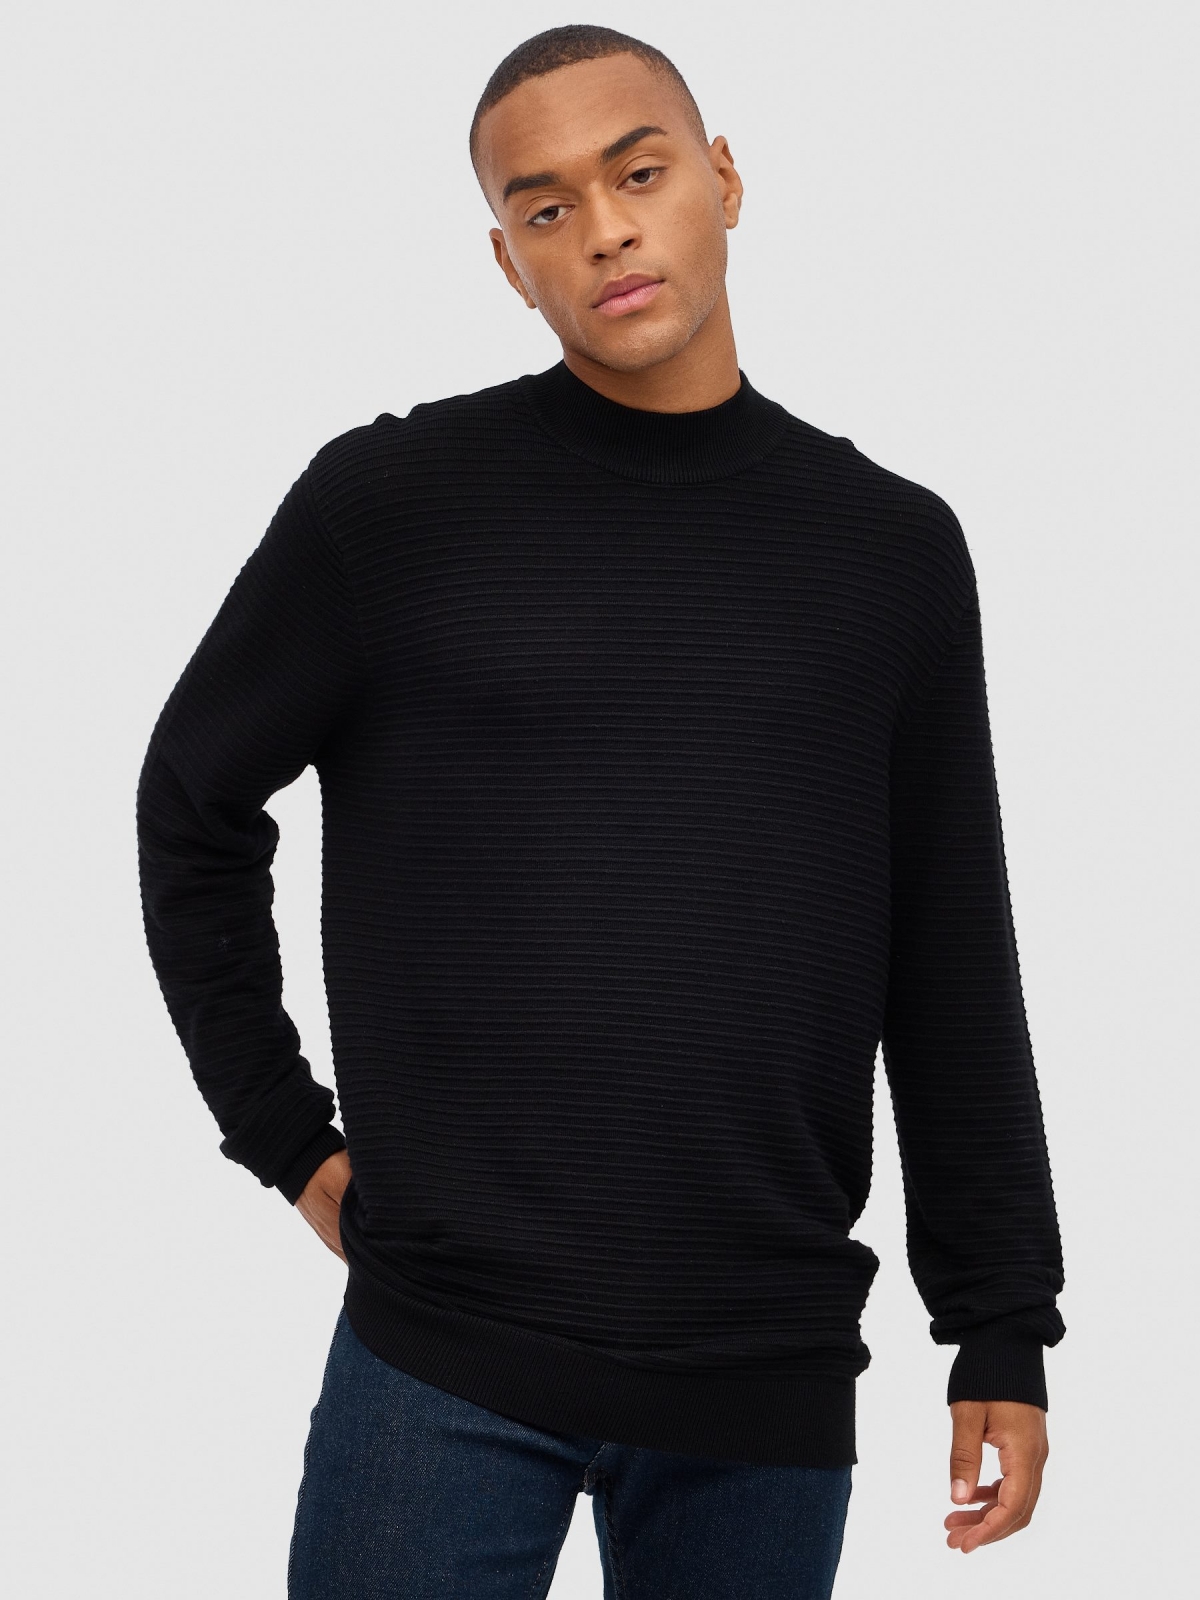 Regular sweater perkins collar black middle front view